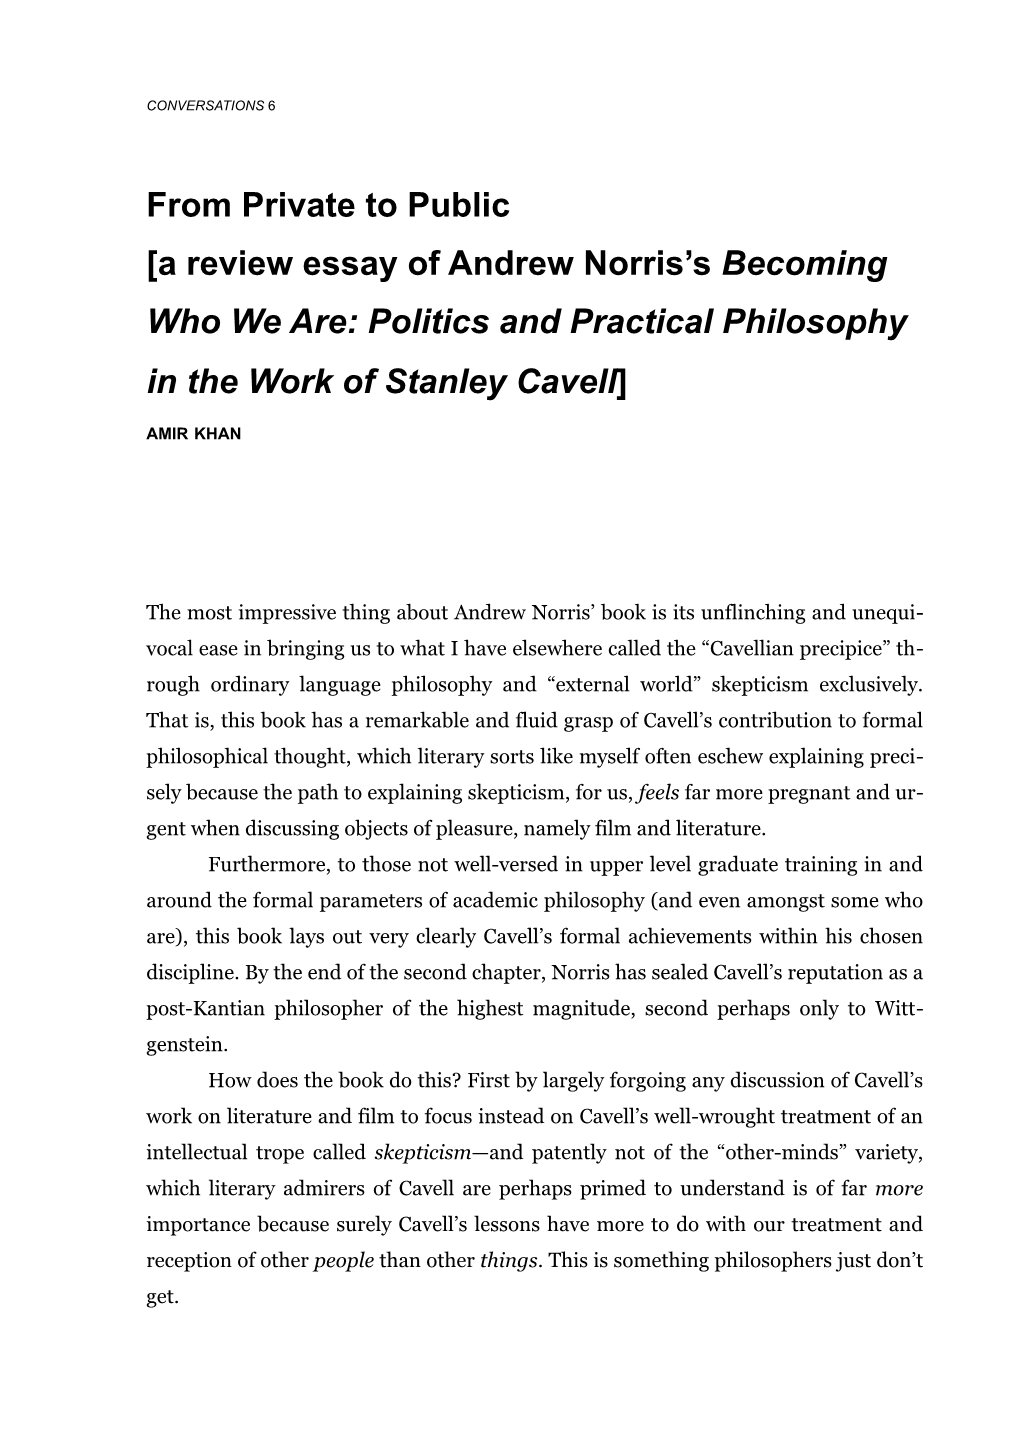 A Review Essay of Andrew Norris's Becoming Who We Are: Politics And